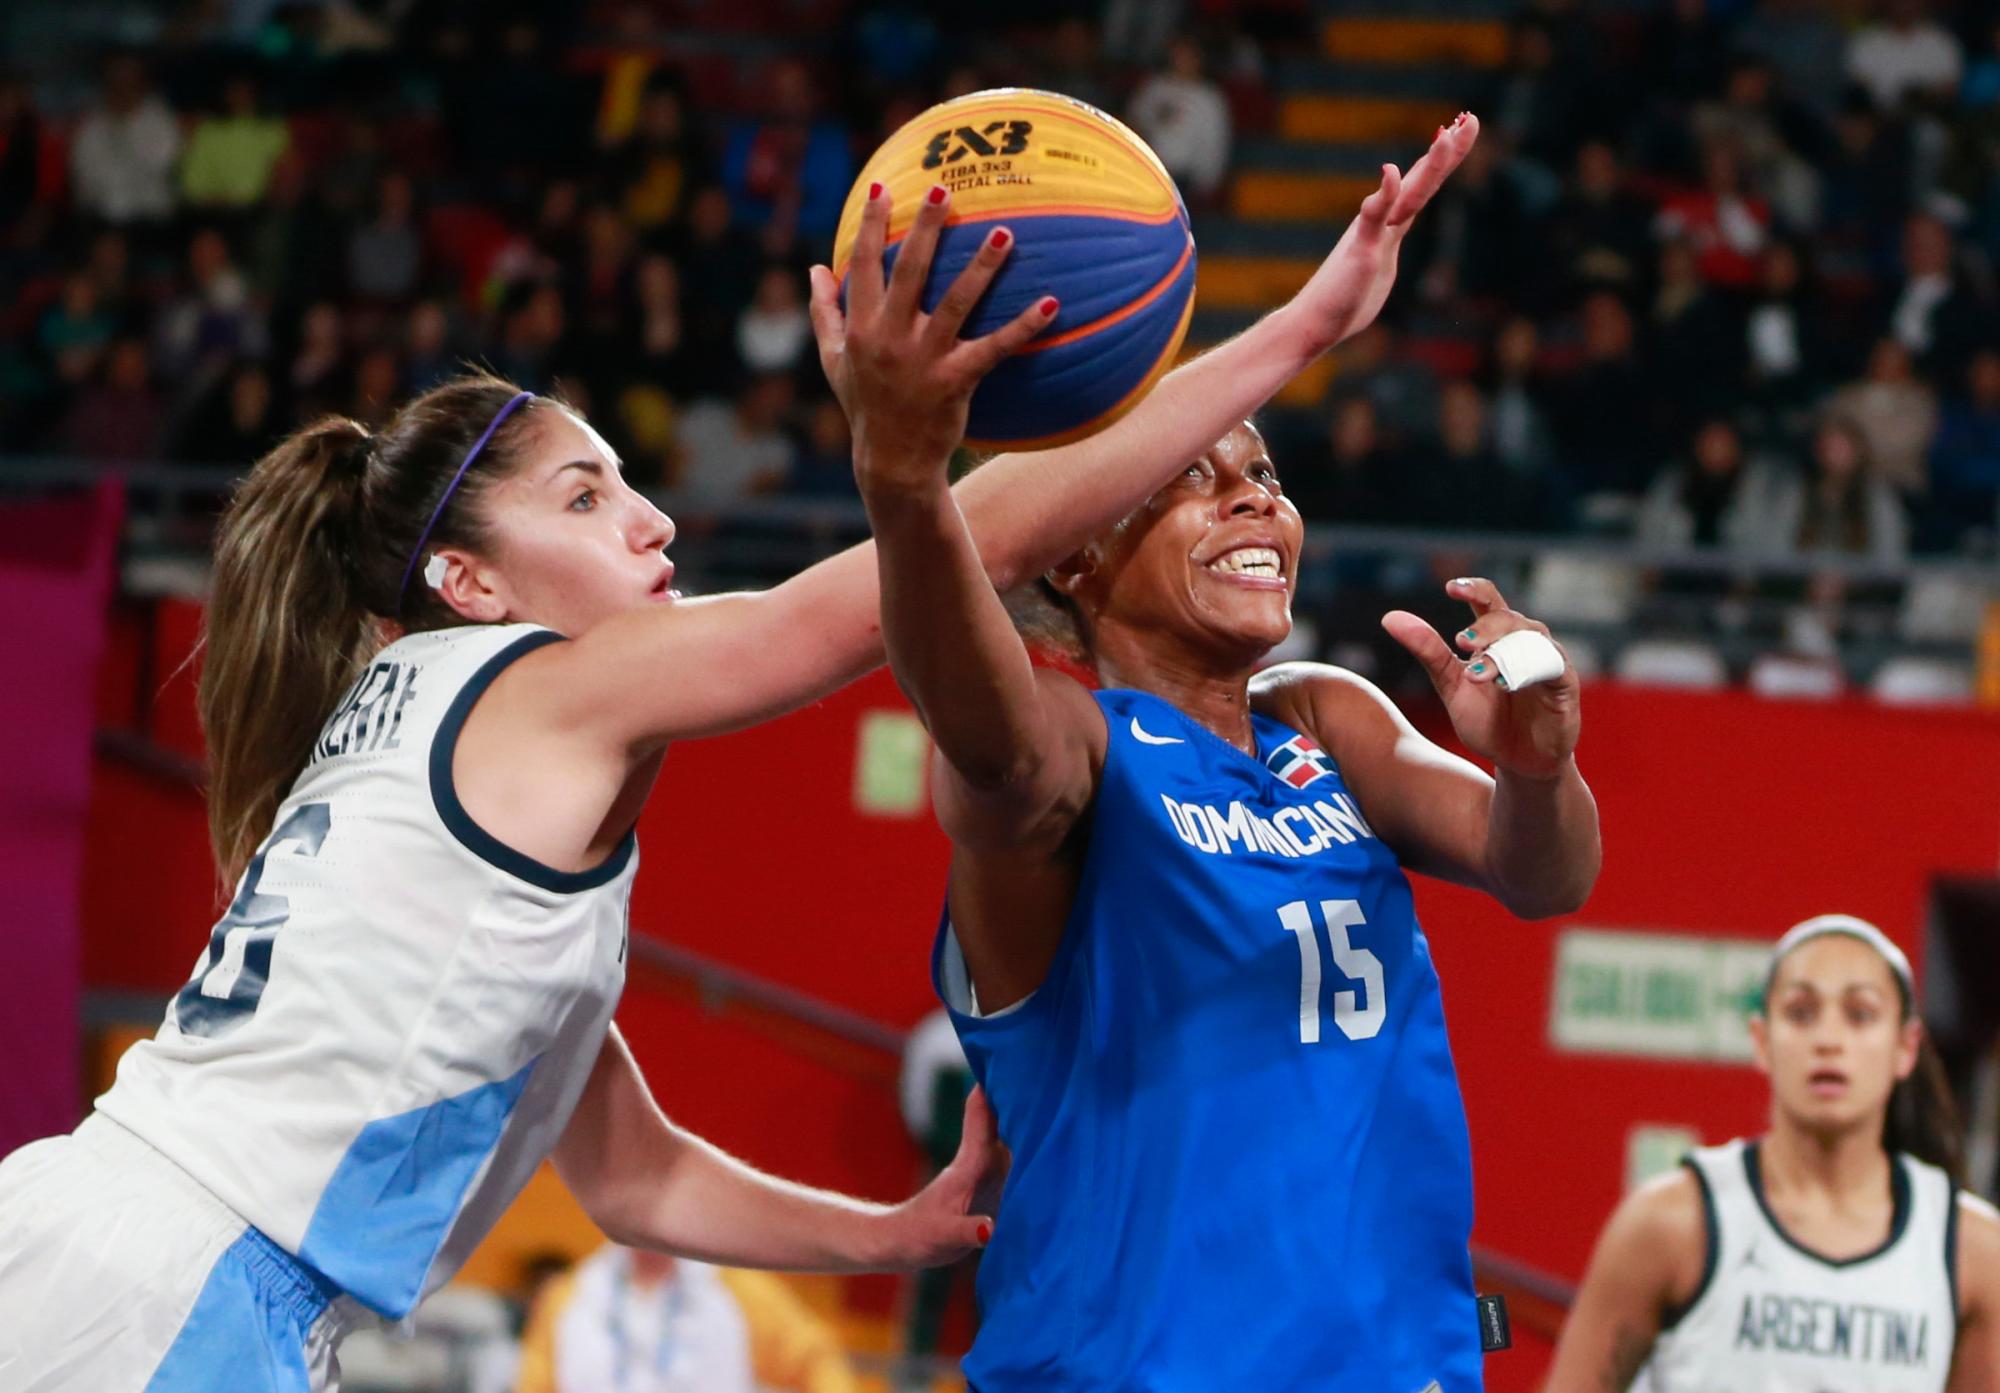 Victoria Llorente from Argentina competes against Sugeiry Monsac from Dominican Republic in the Basketball 3x3 game at Coliseo Eduardo Dibos during Pan American Games Lima 2019. 